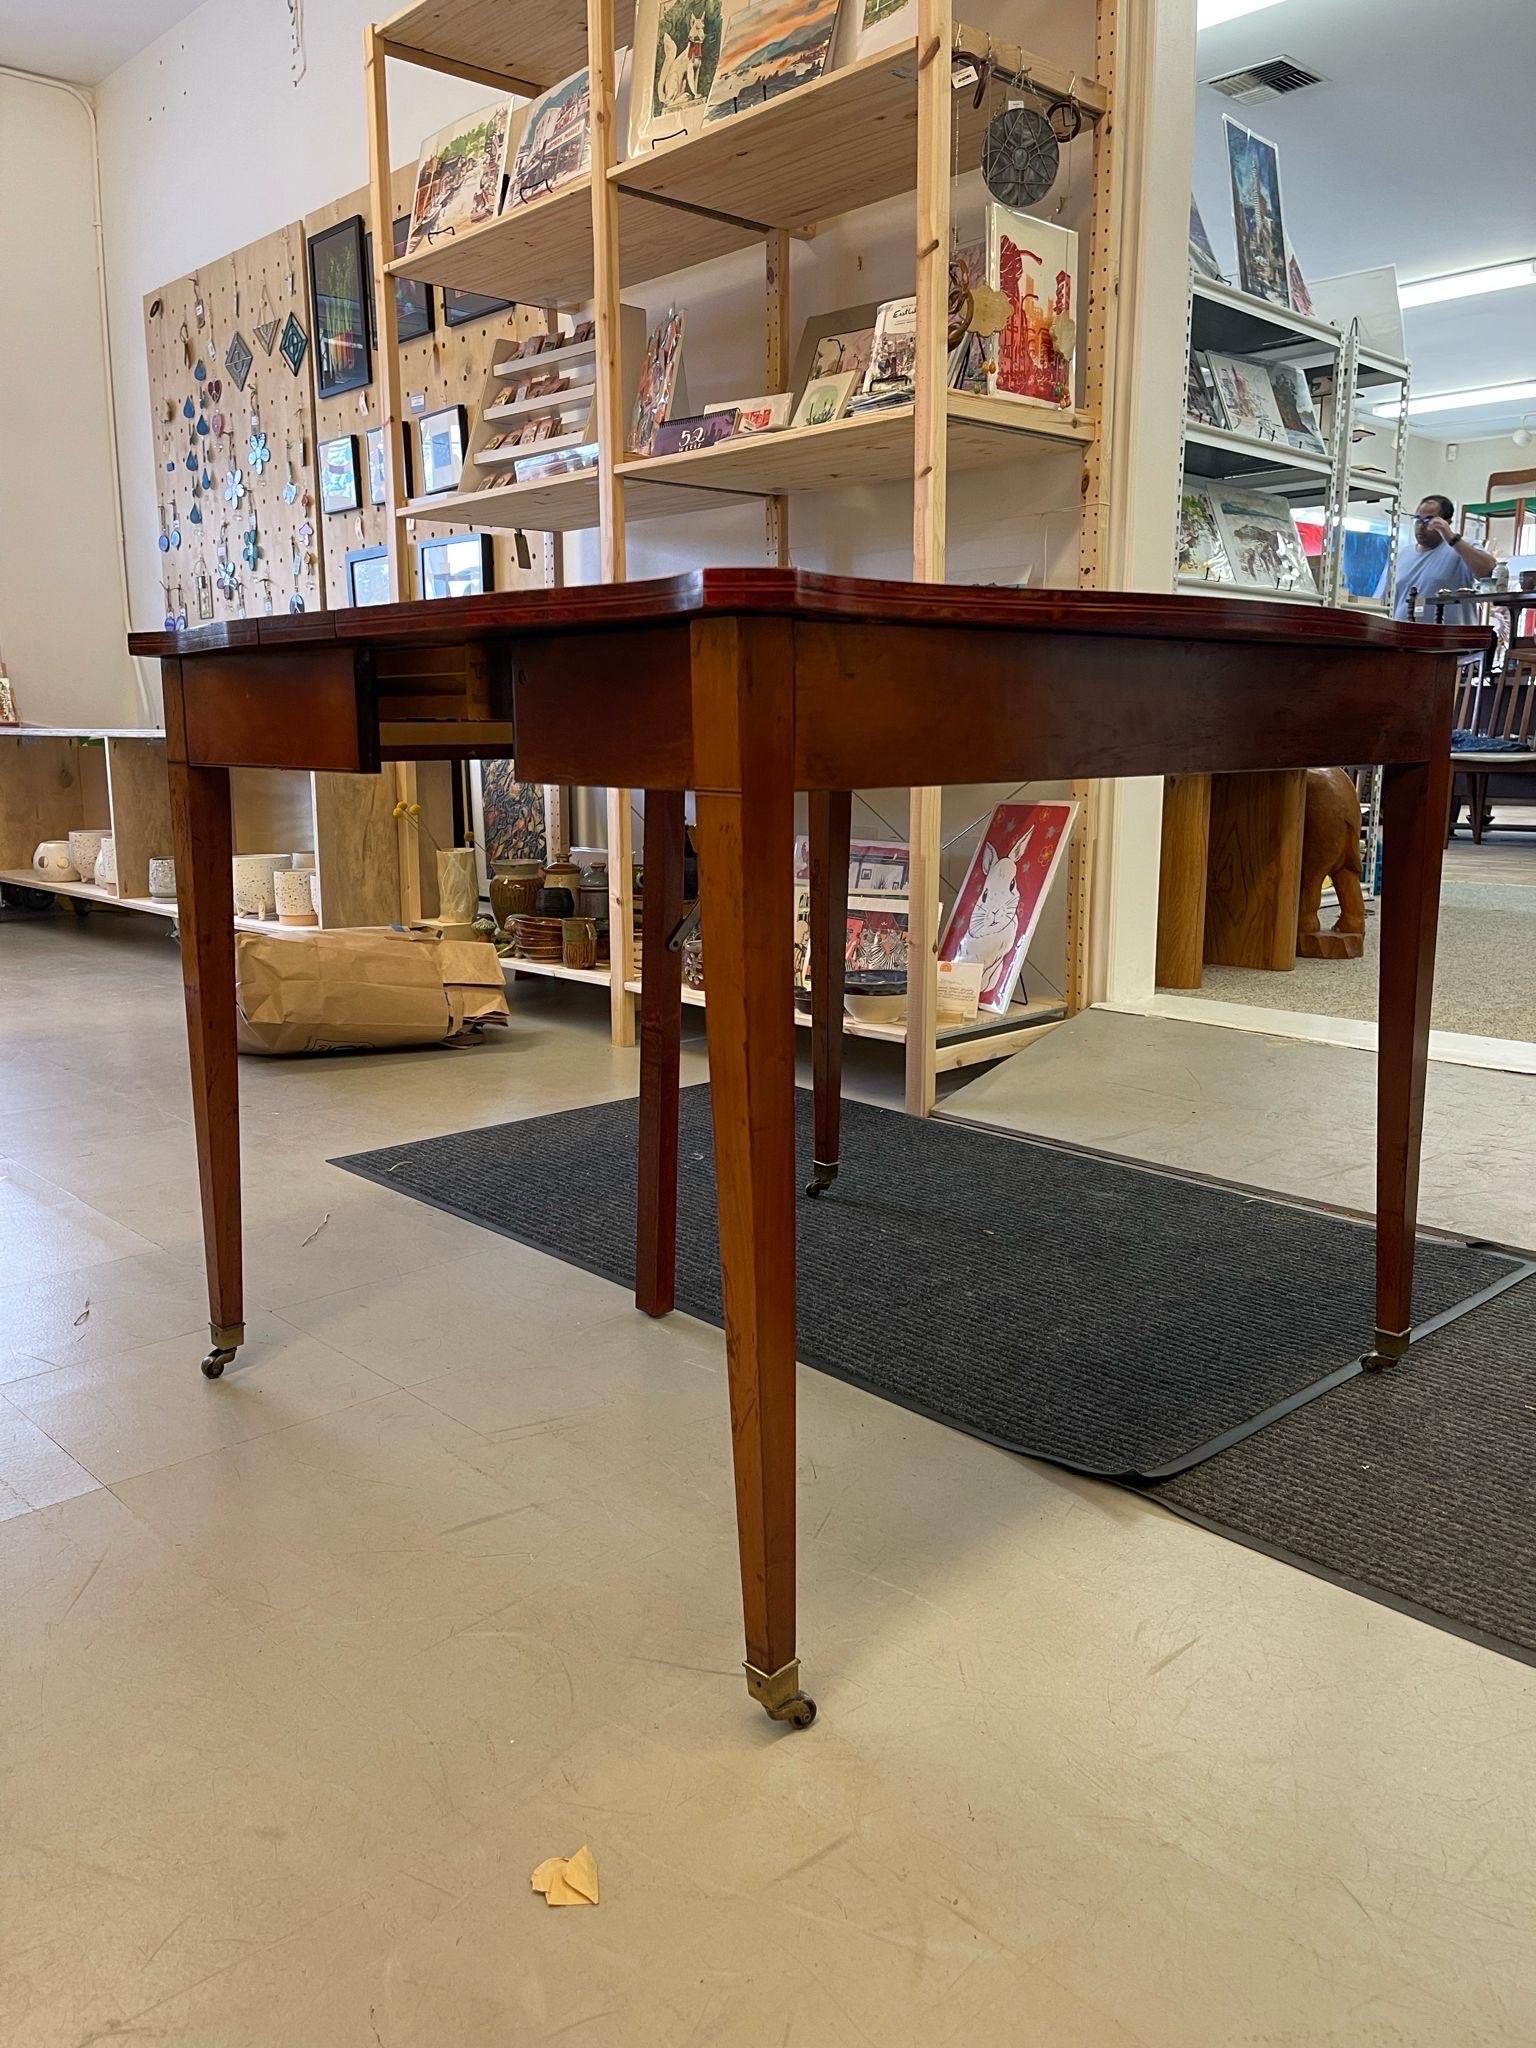 This extending table can be used as a Console Table or Dining Table. The extra leg in the center provides stability and durability. Beautiful floral wood inlay detailing accents the front of the piece. Black lining details the edge of the piece.The